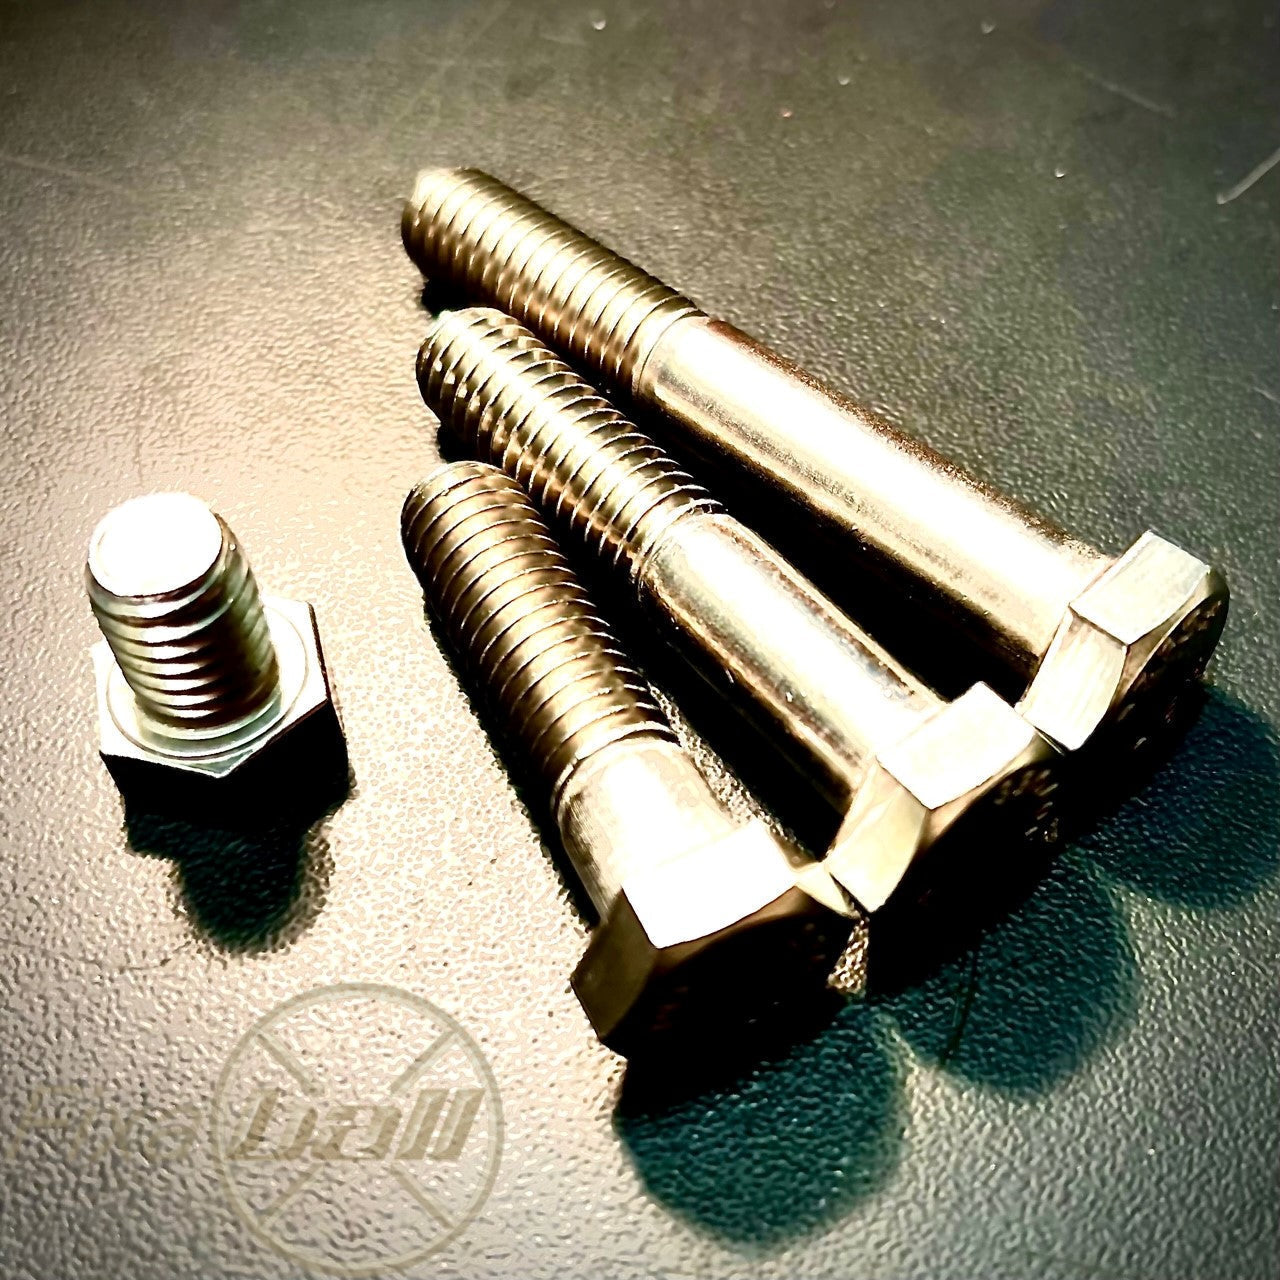 UNC 1/2", Hex Bolt and Hex Set Screw, A2/ 304 Stainless Steel, DIN 931. Hex-Bolt UNC 1/2", Hex Bolt and Hex Set Screw, A2/ 304 Stainless Steel, DIN 931. UNC, Hex-Bolt